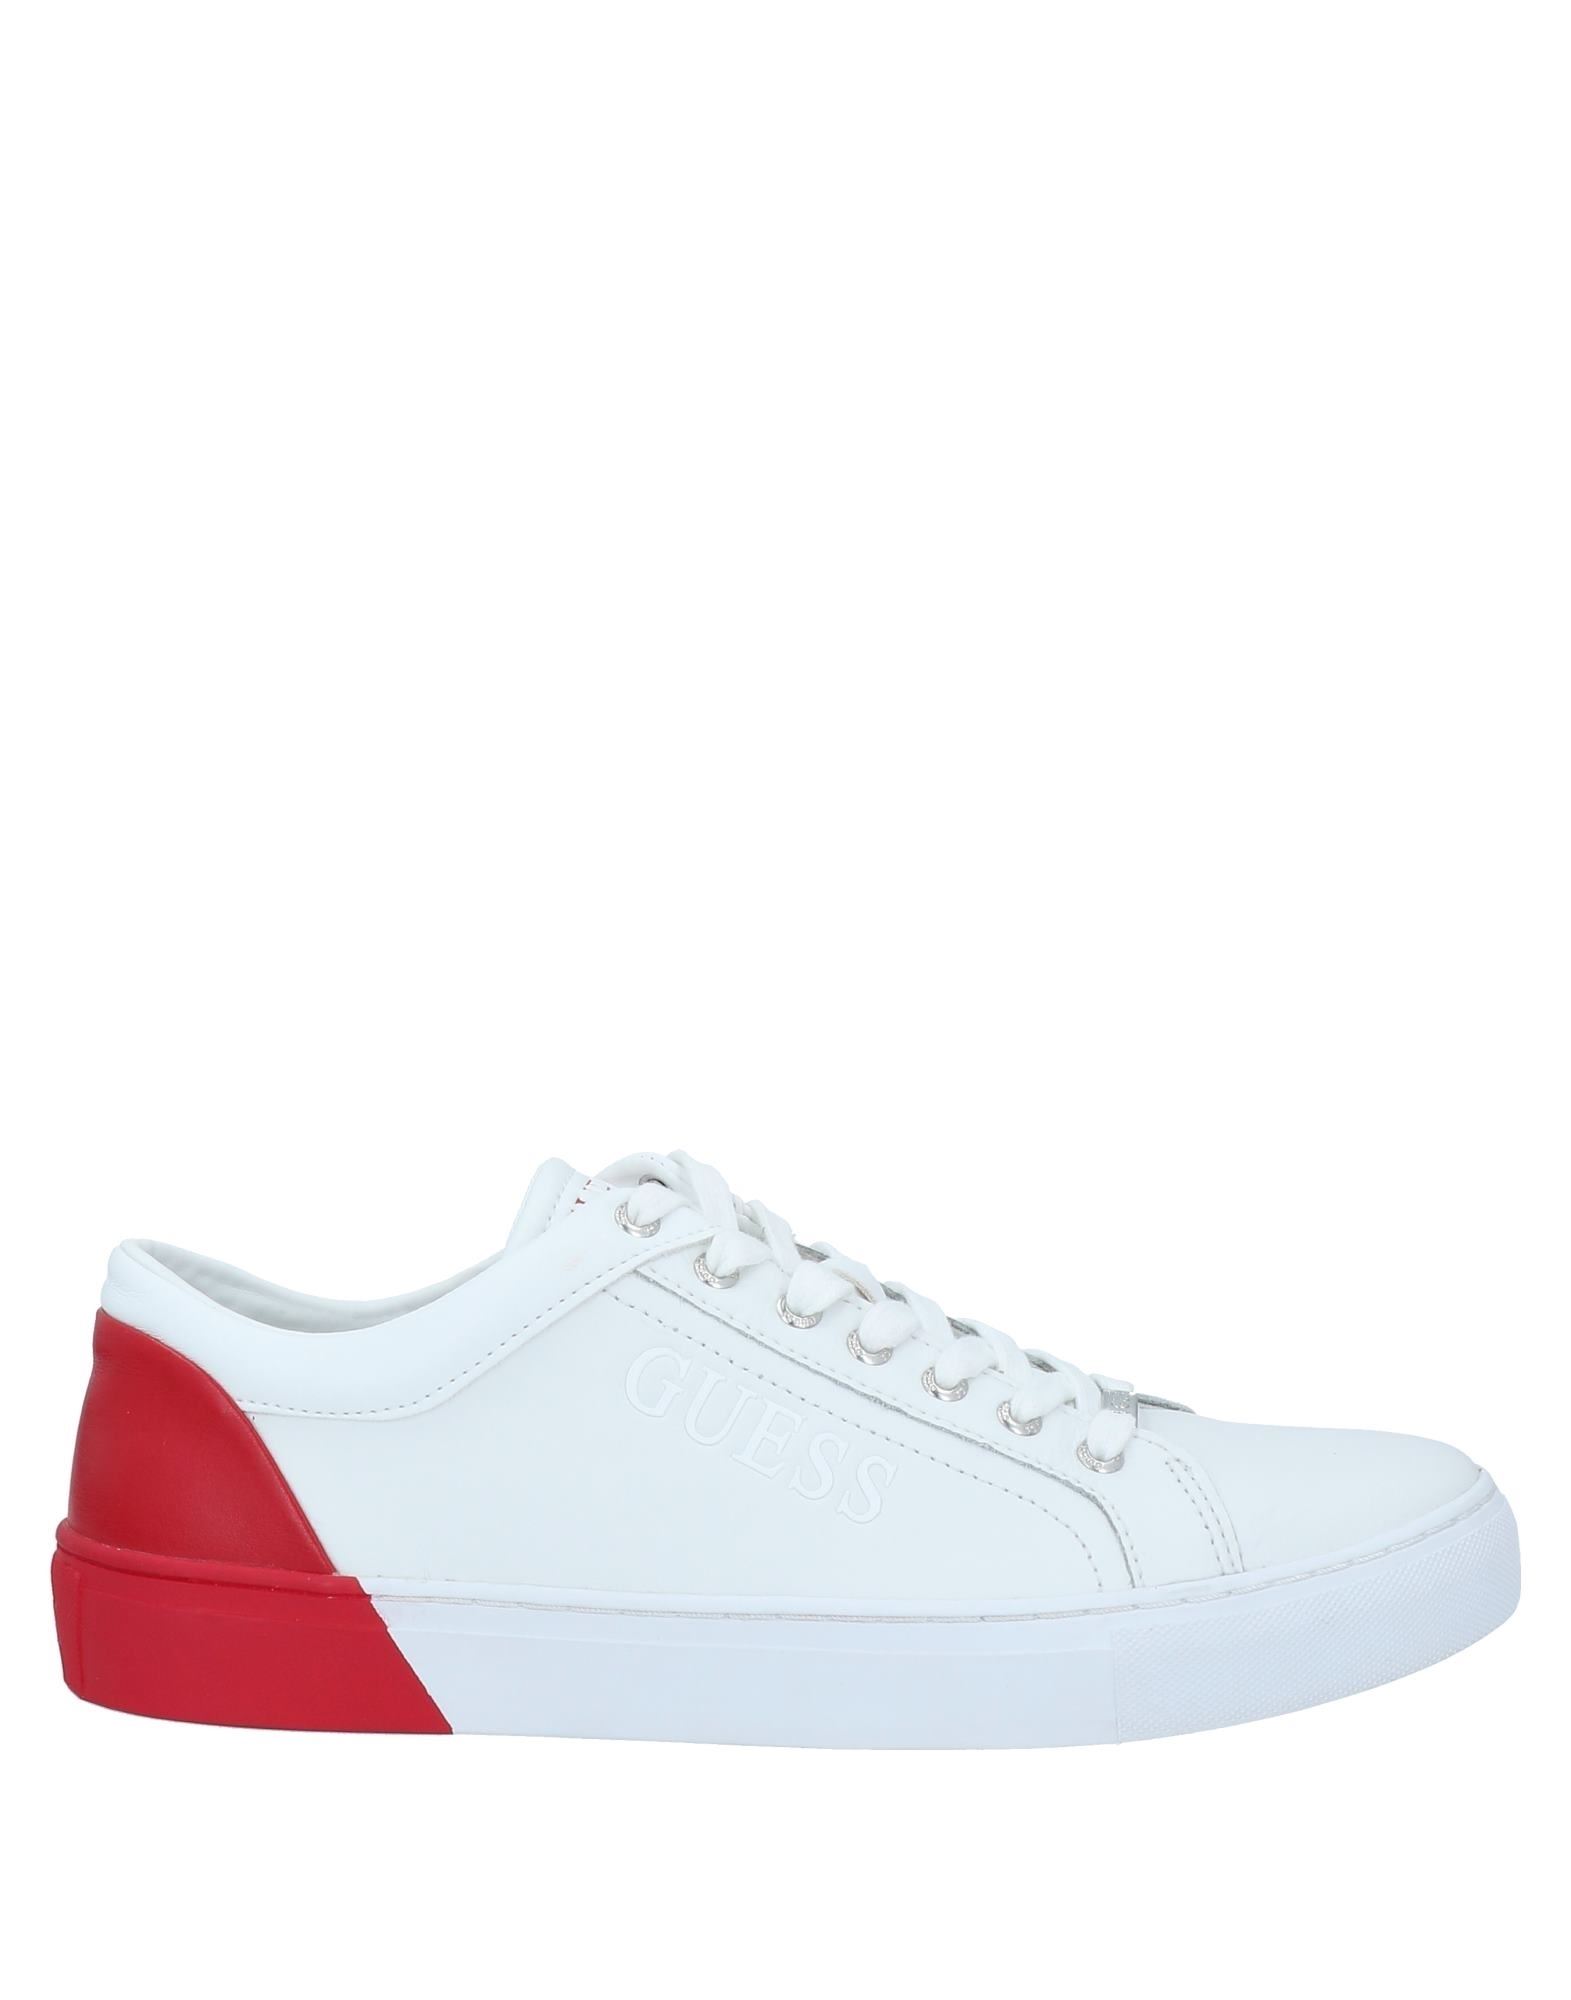 Guess Sneakers In White